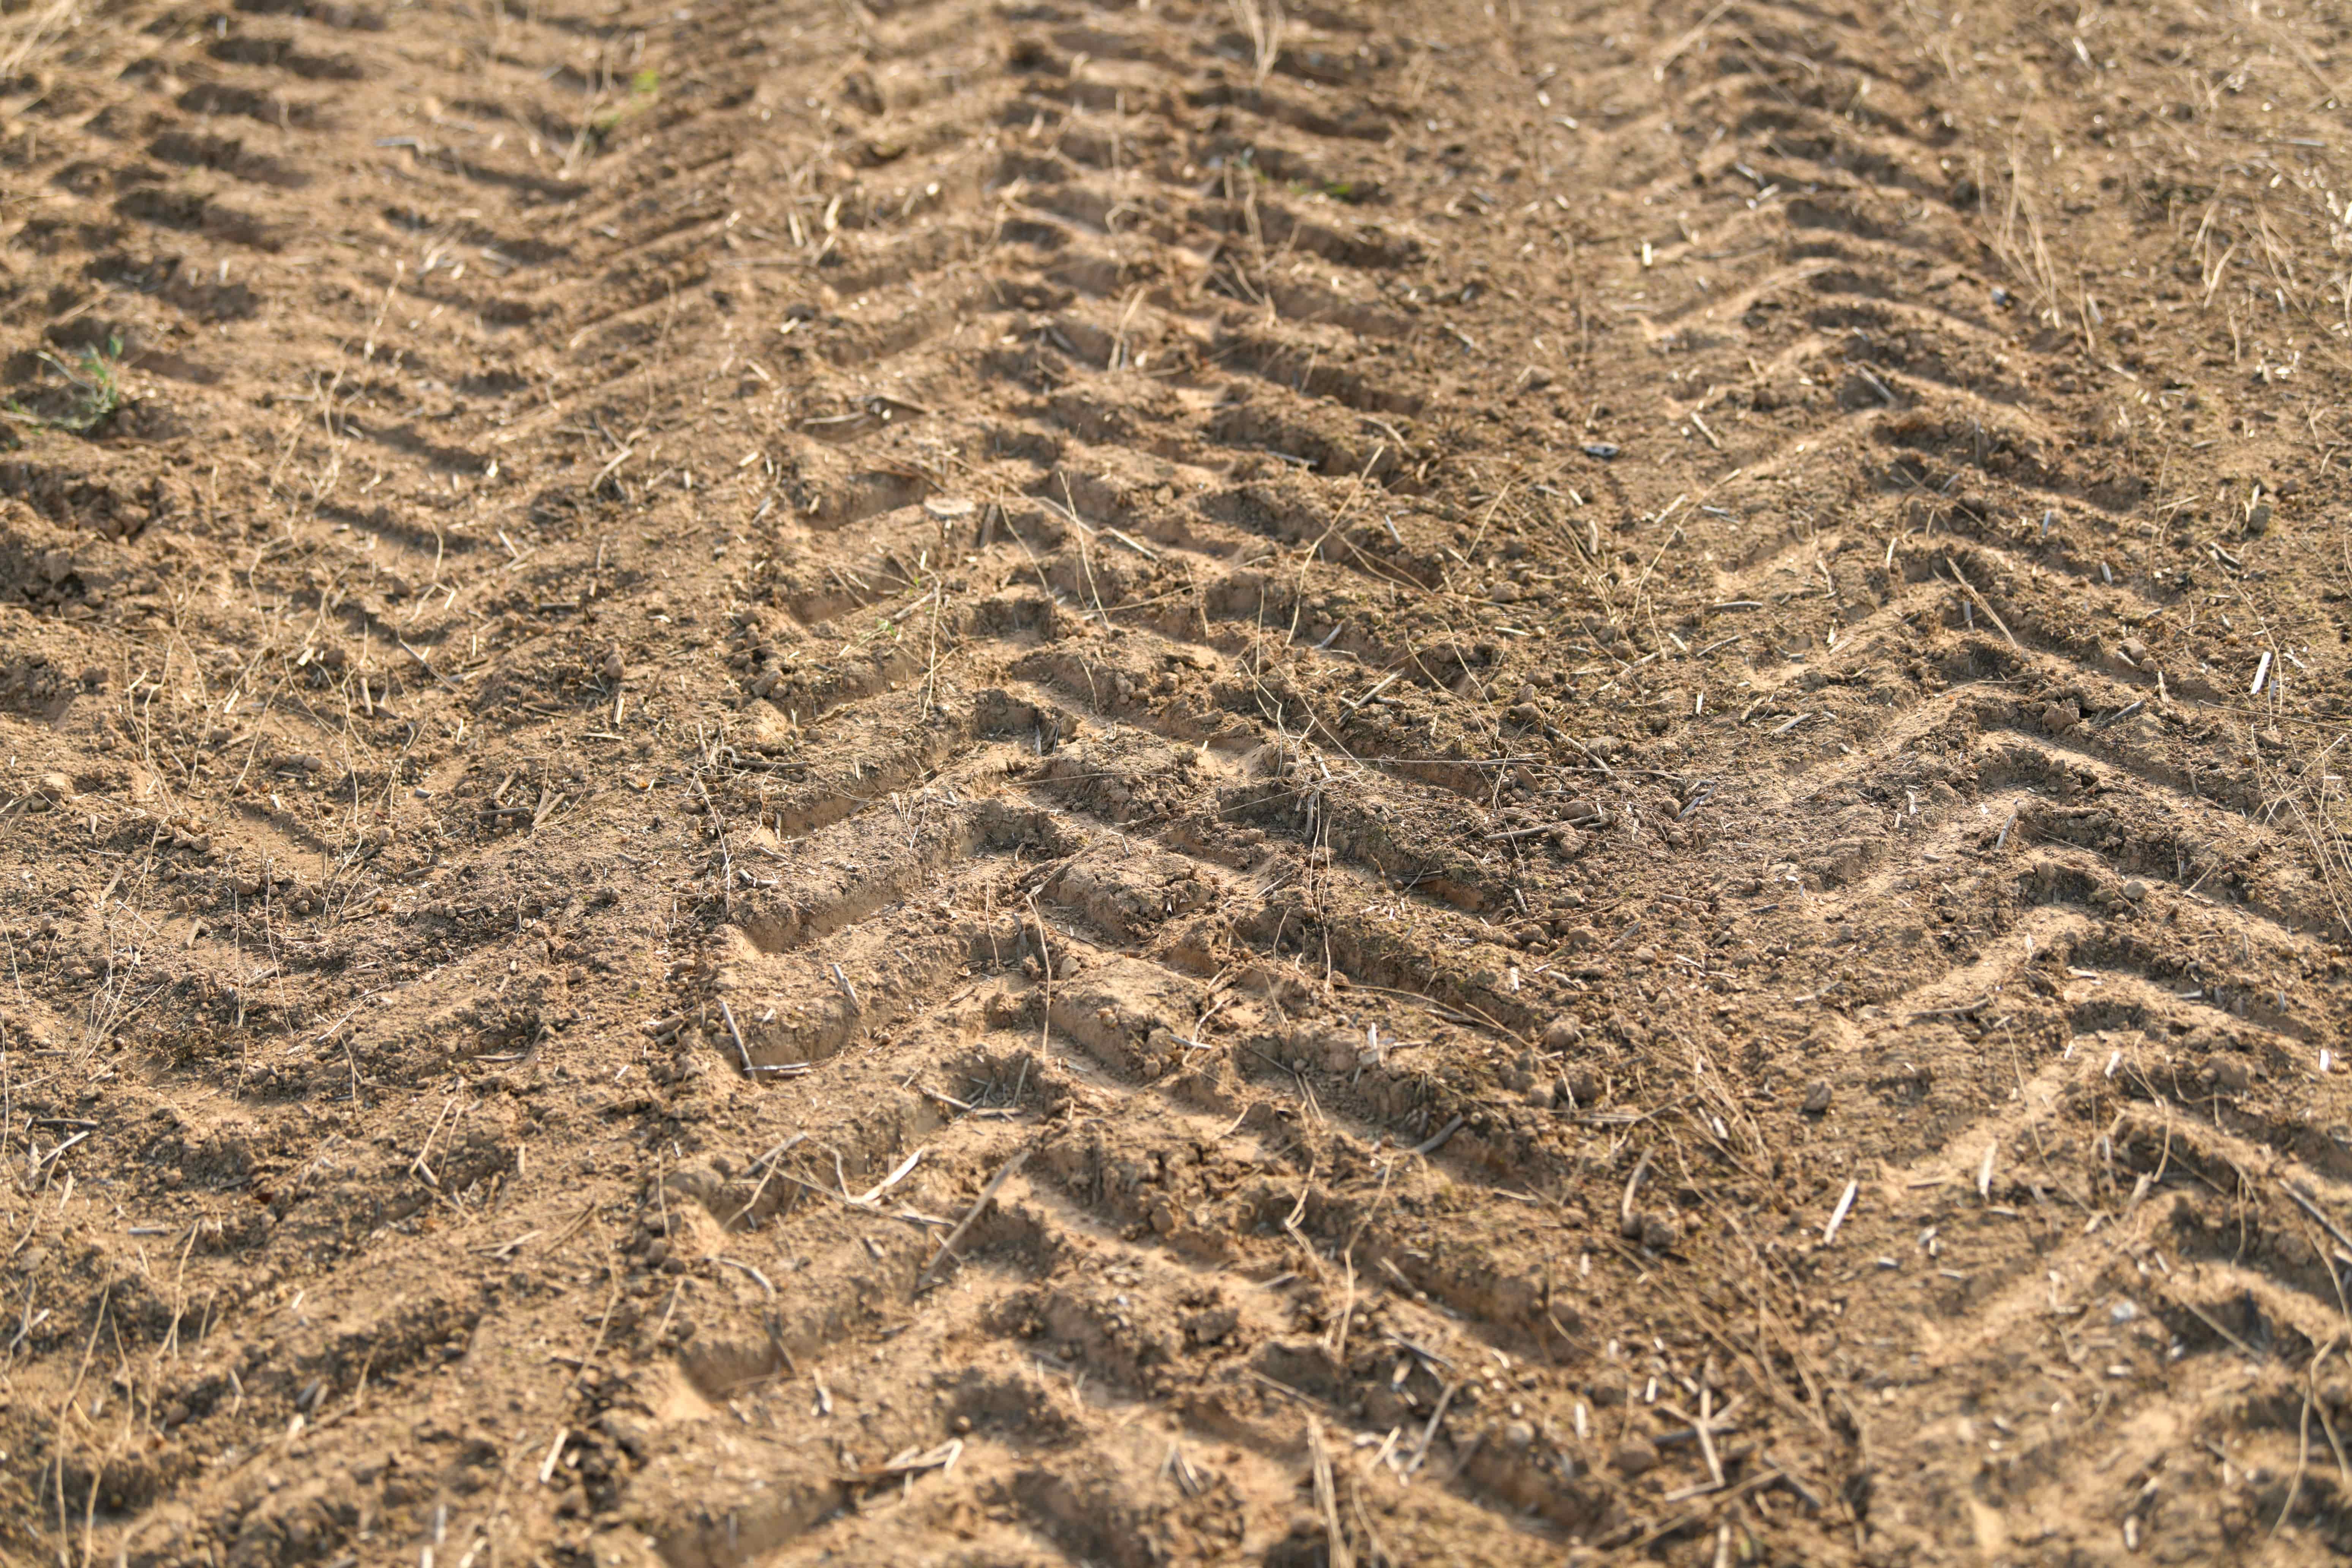 Farmland with lug tread indentions in the dirt.